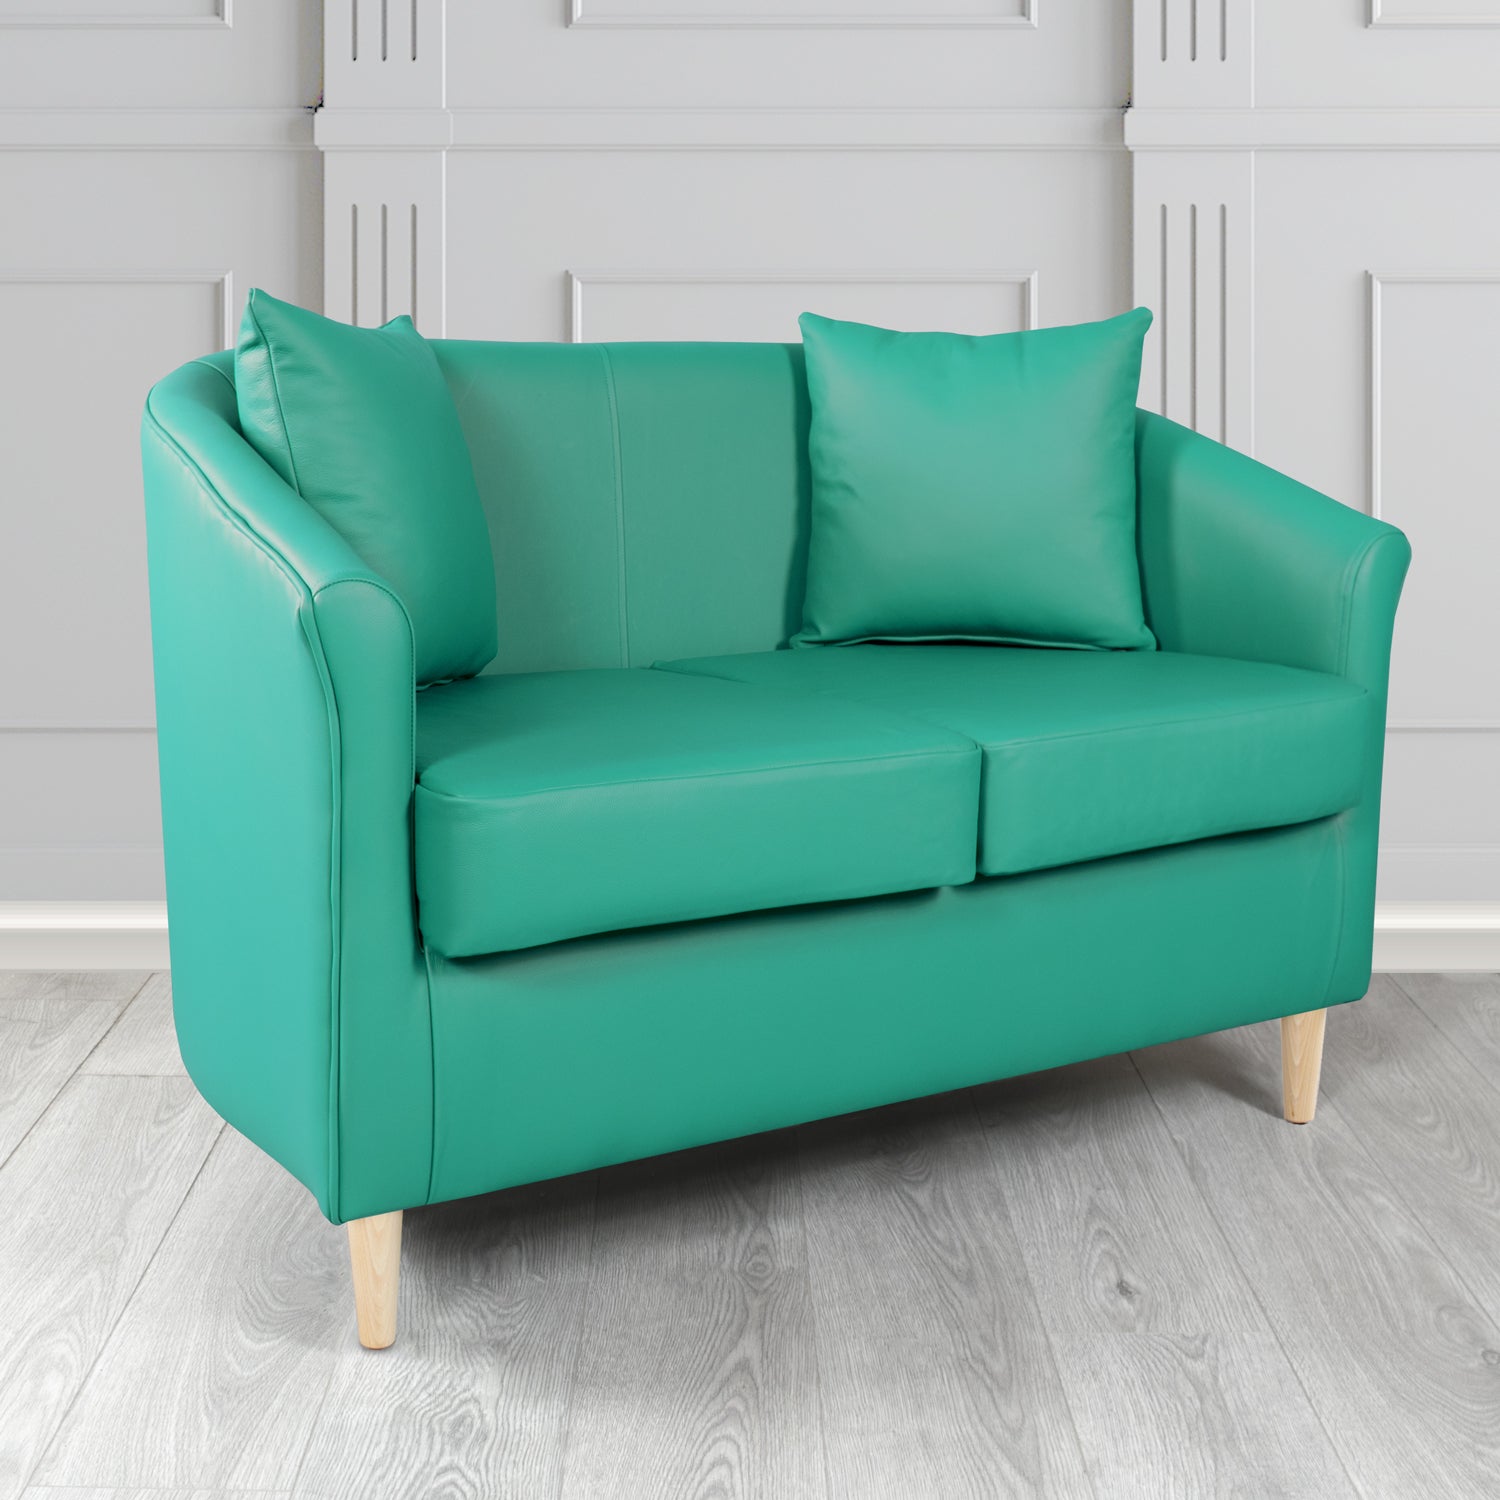 St Tropez Shelly Dark Teal Crib 5 Genuine Leather 2 Seater Tub Sofa with Scatter Cushions - The Tub Chair Shop